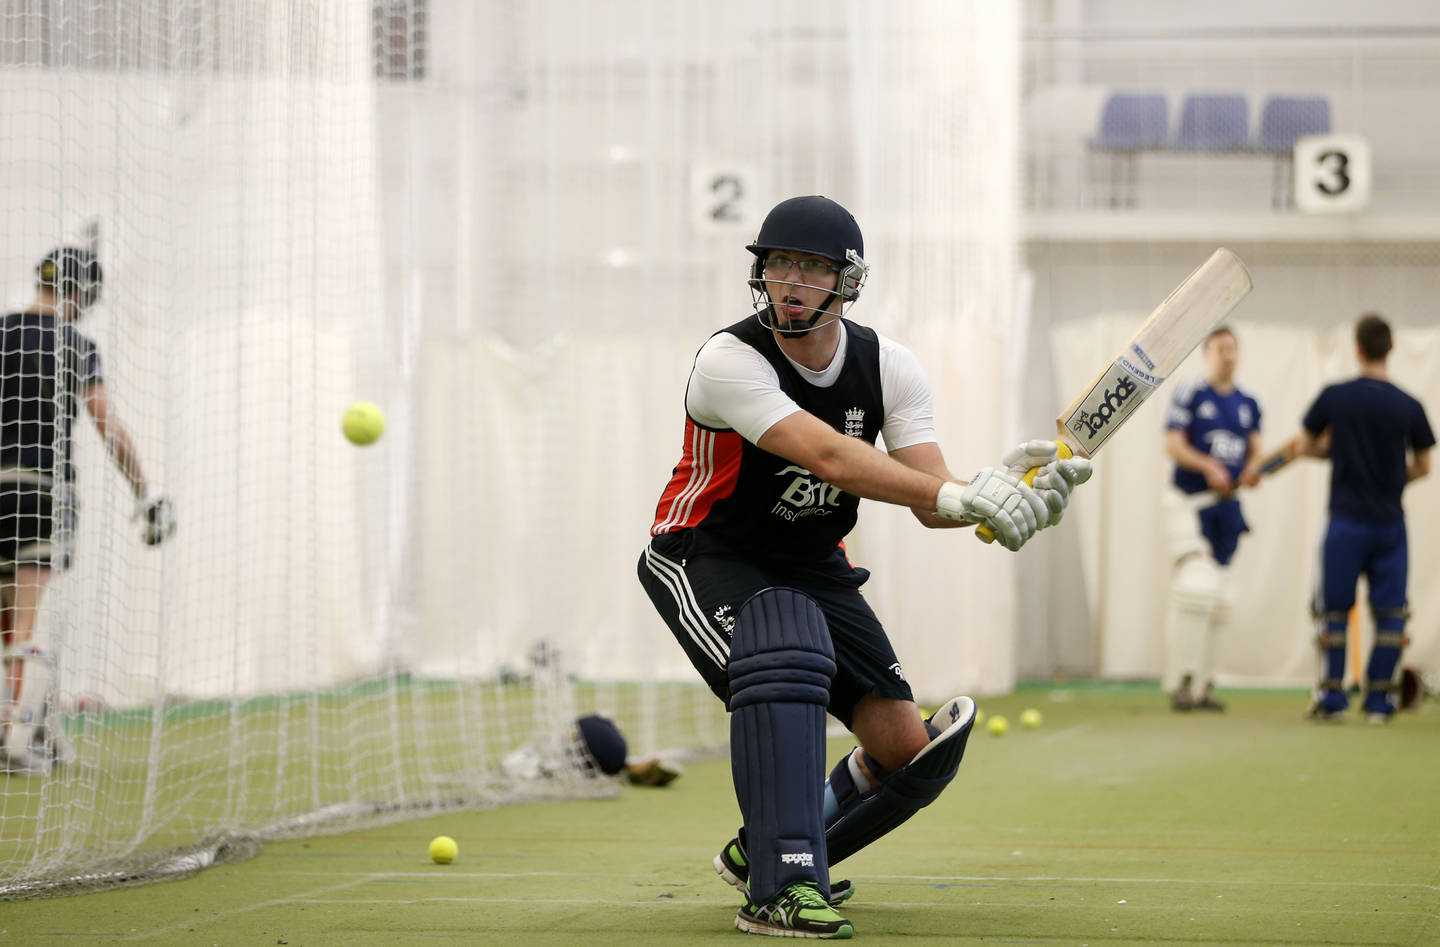 Disabled player in cricket training